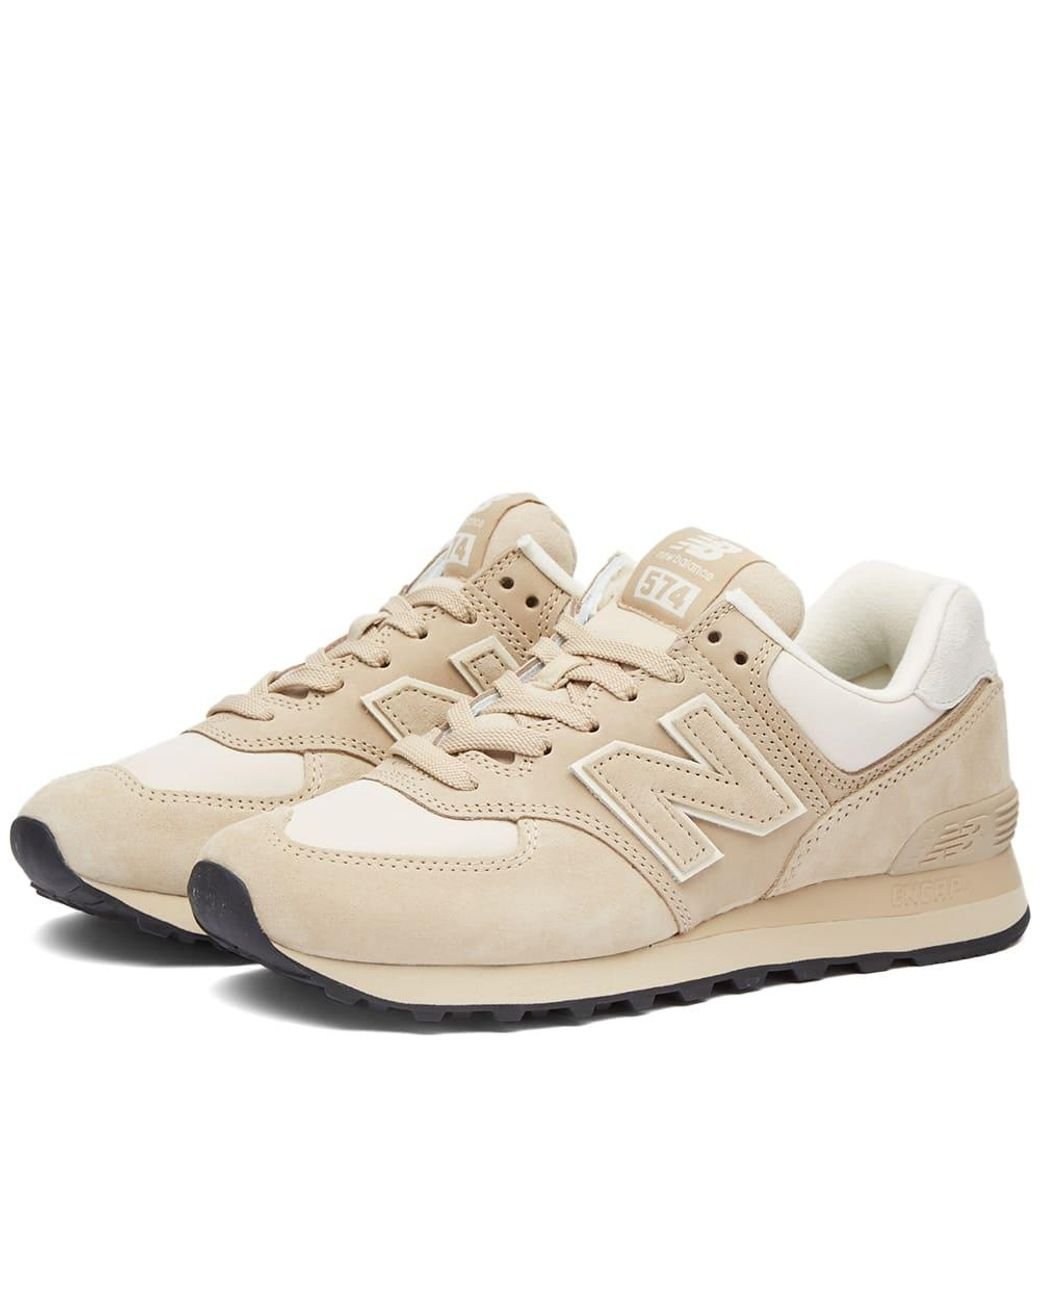 Junya Watanabe X New Balance Suede Ml574 Sneakers in White for Men | Lyst  Canada